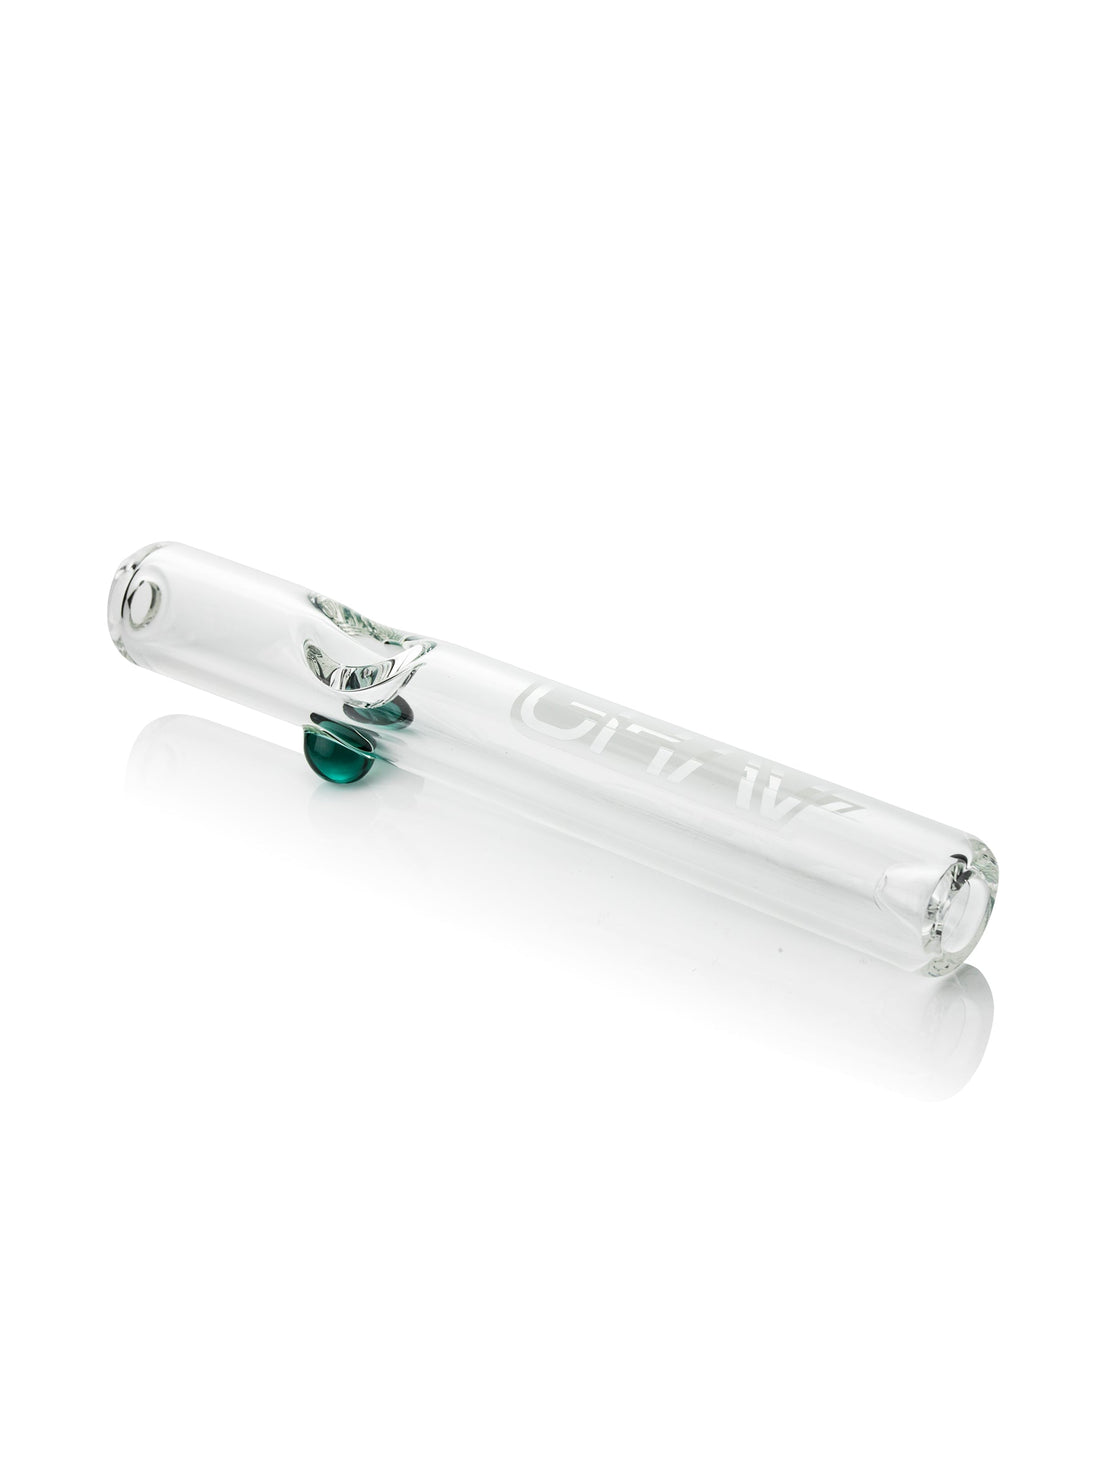 GRAV Classic Steamroller - Clear with Etch Label